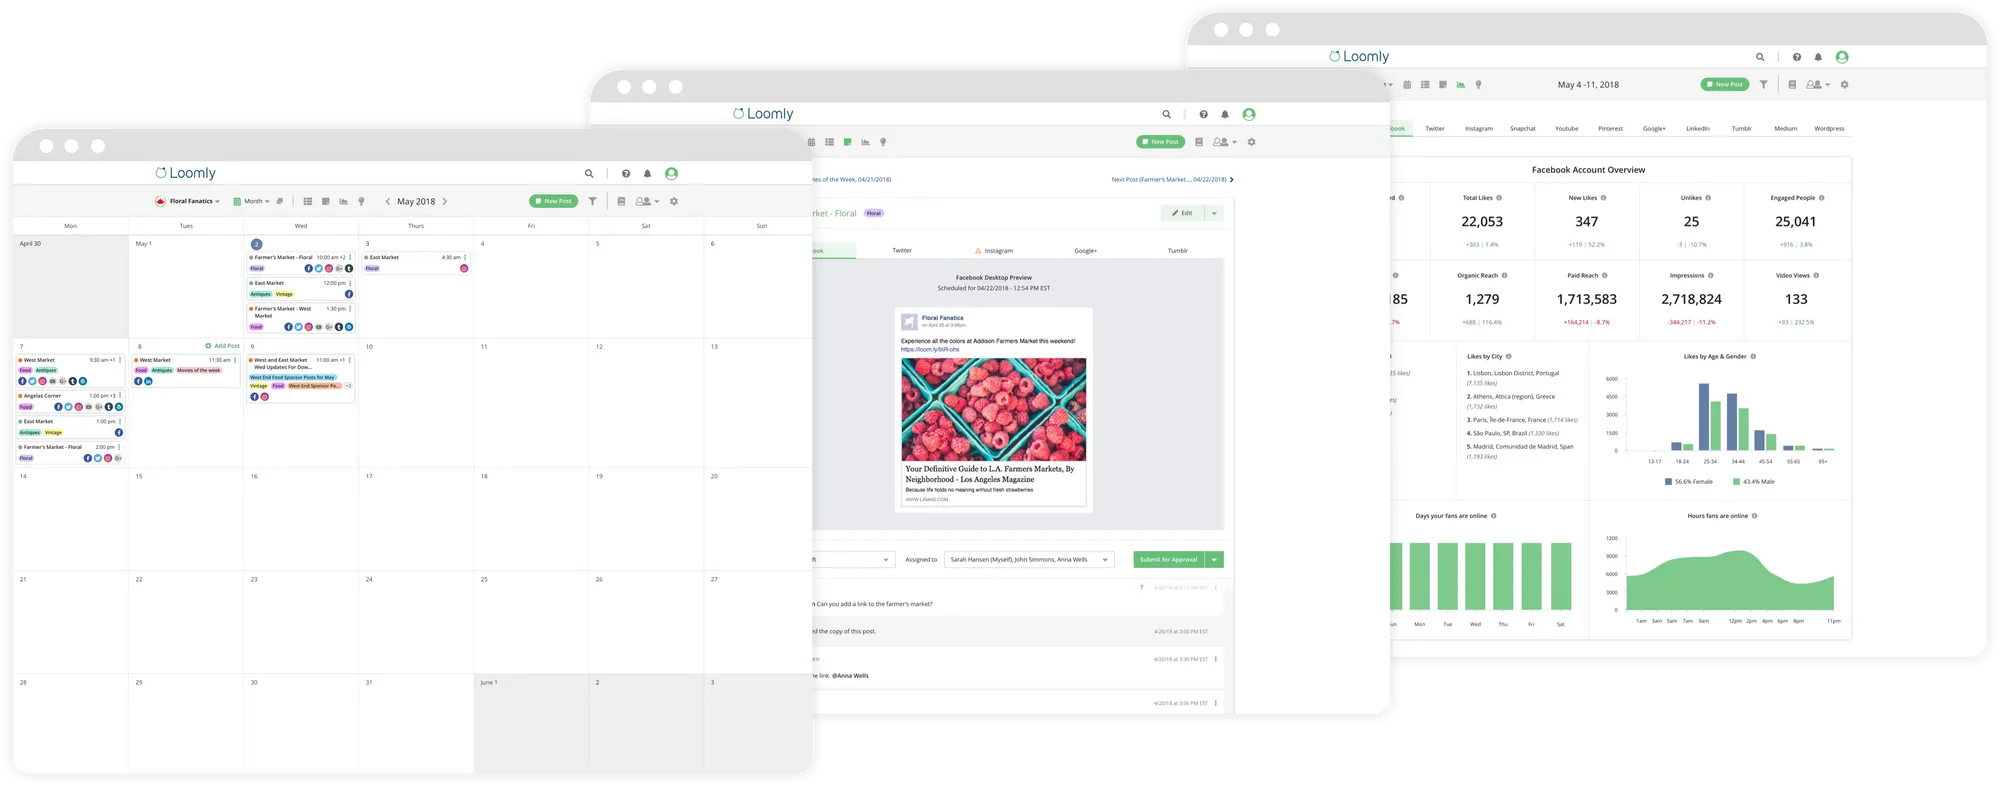 Loomly makes brand & content management easy for marketing teams